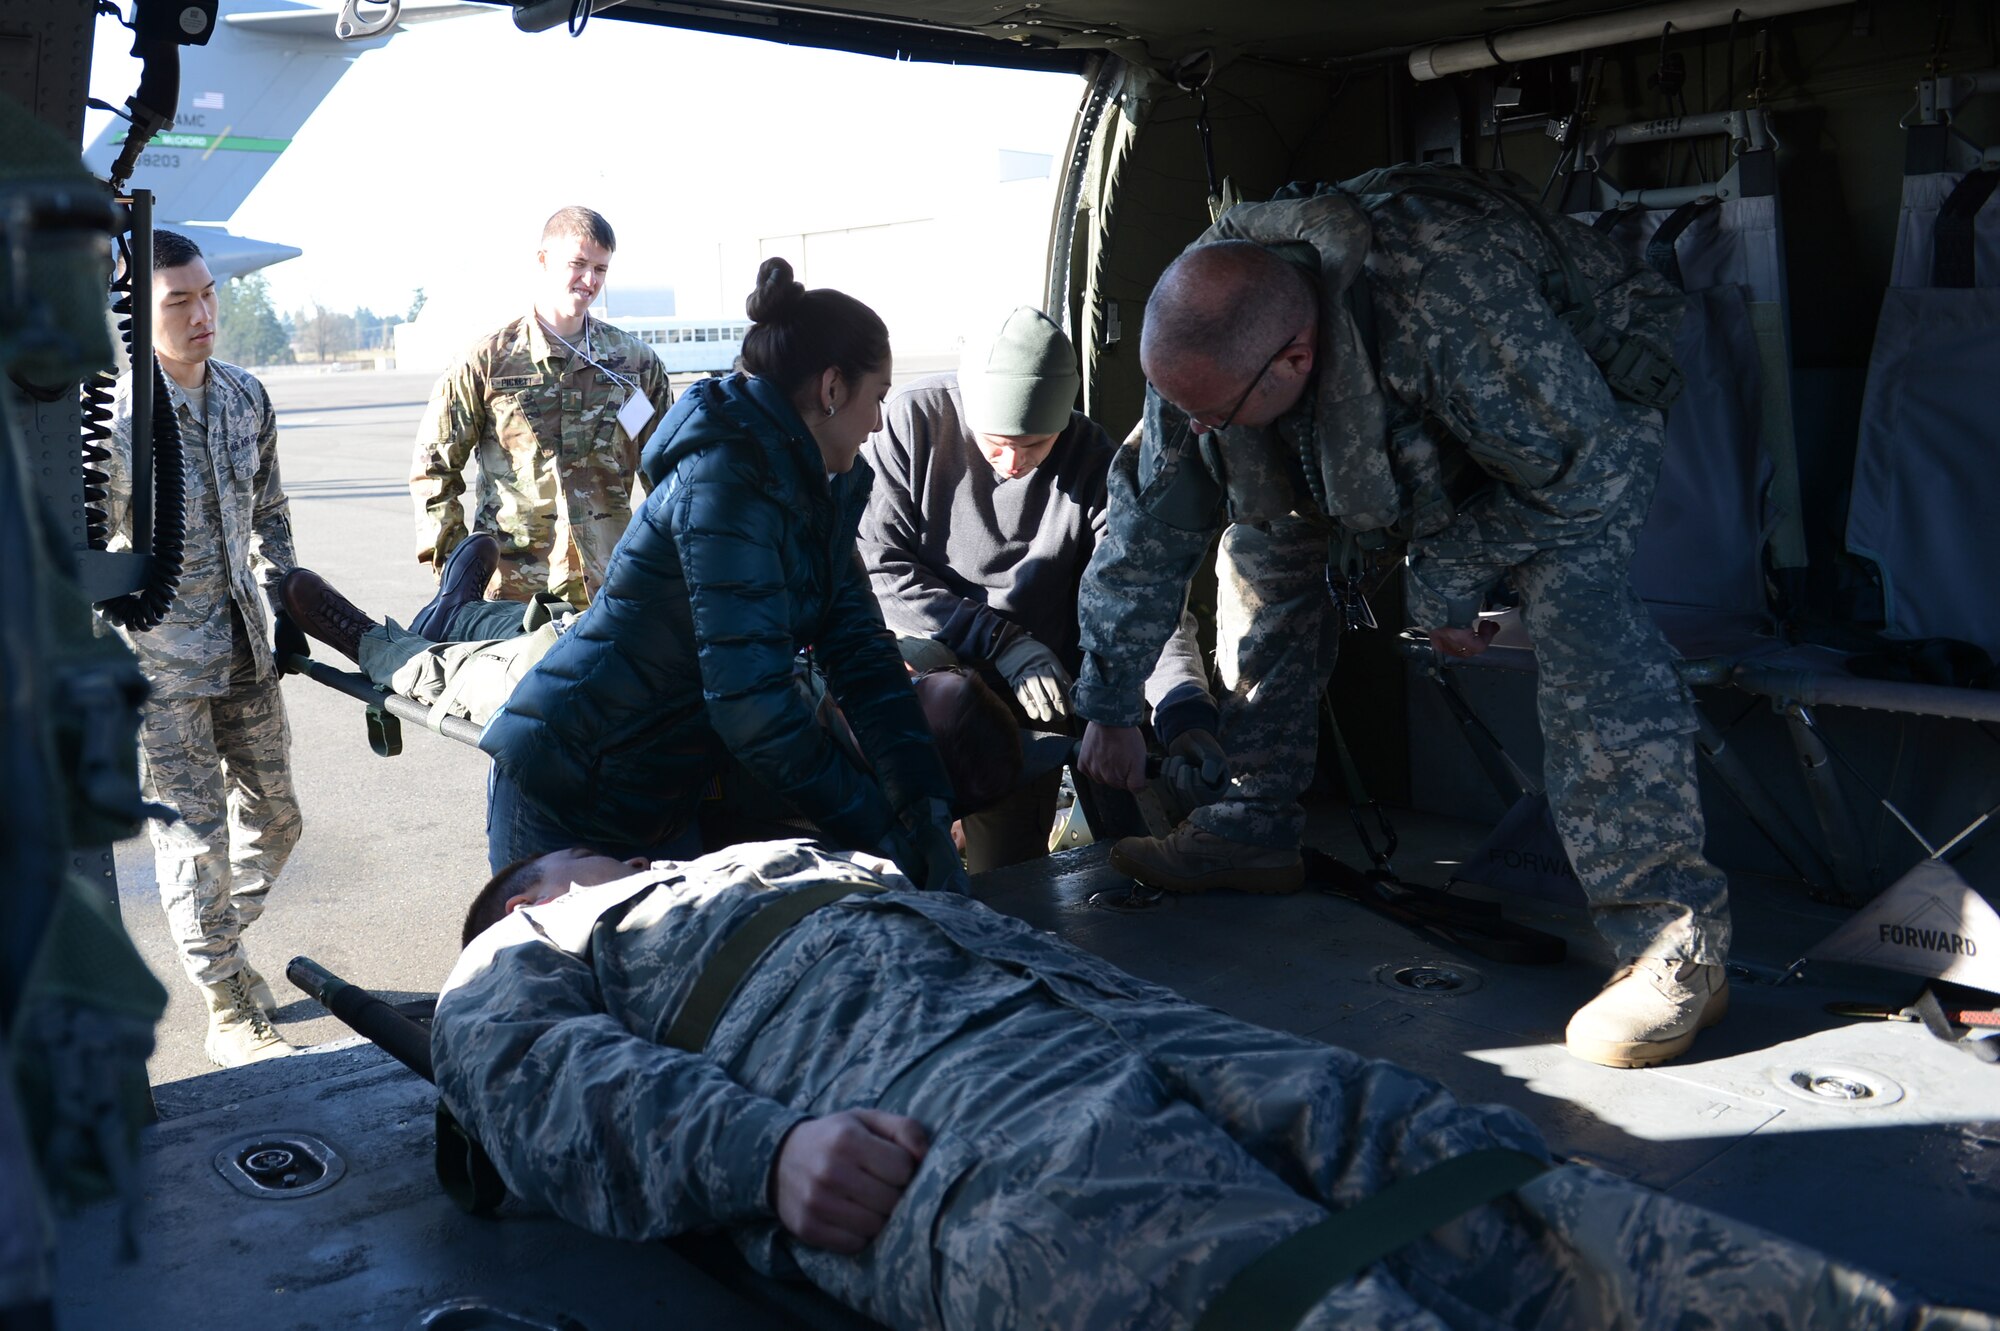 Army Sgt. Michael Cummings, Washington National Guard, Detachment 2, 168 General Support Aviation Battalion crew chief, assists members of the Association of Military Osteopathic Physicians and Surgeons load simulated patients into a UH-60 Black Hawk helicopter, March 10, 2018, at Joint Base Lewis-McChord, Wash. Crew chiefs are trained to assist medics during patient transport. (U.S. Air Force photo by Airman 1st Class Sara Hoerichs)